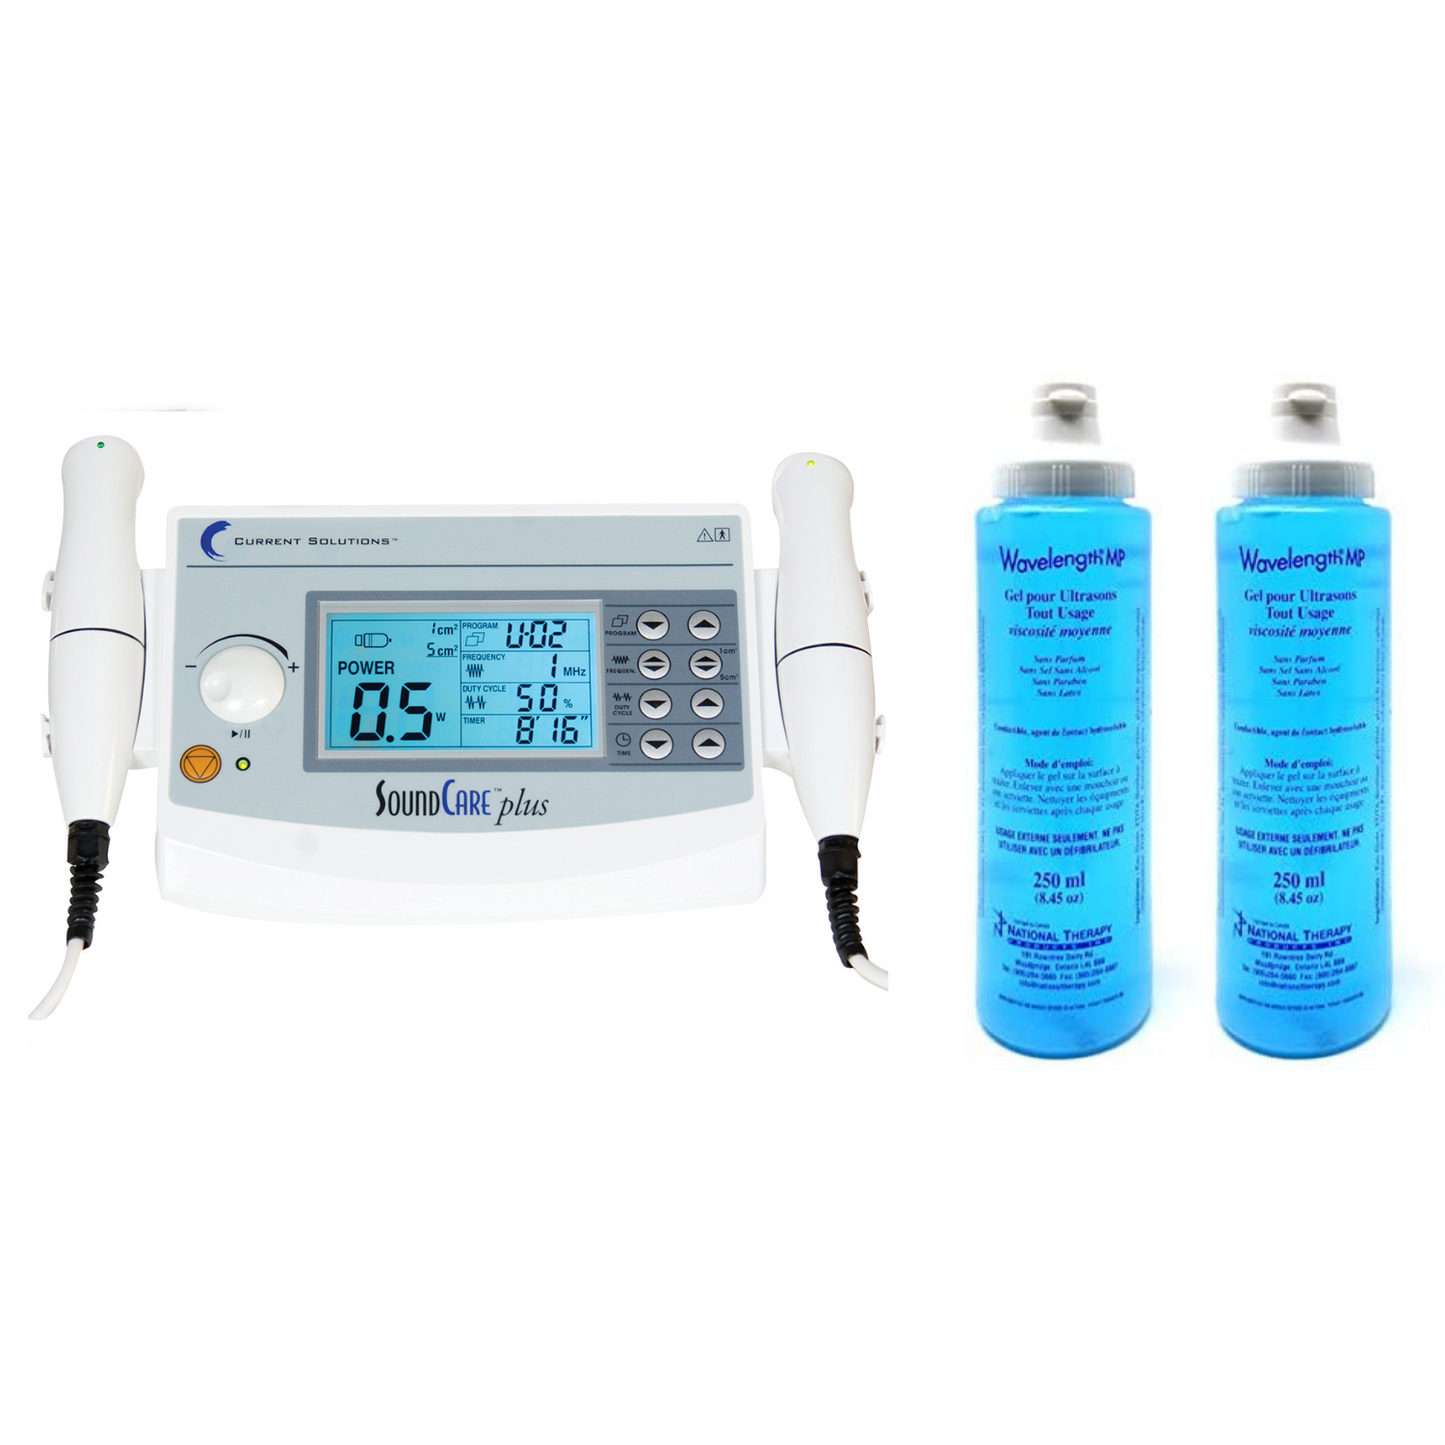 SoundCare plus Ultrasound Unit - For Professional USE ONLY